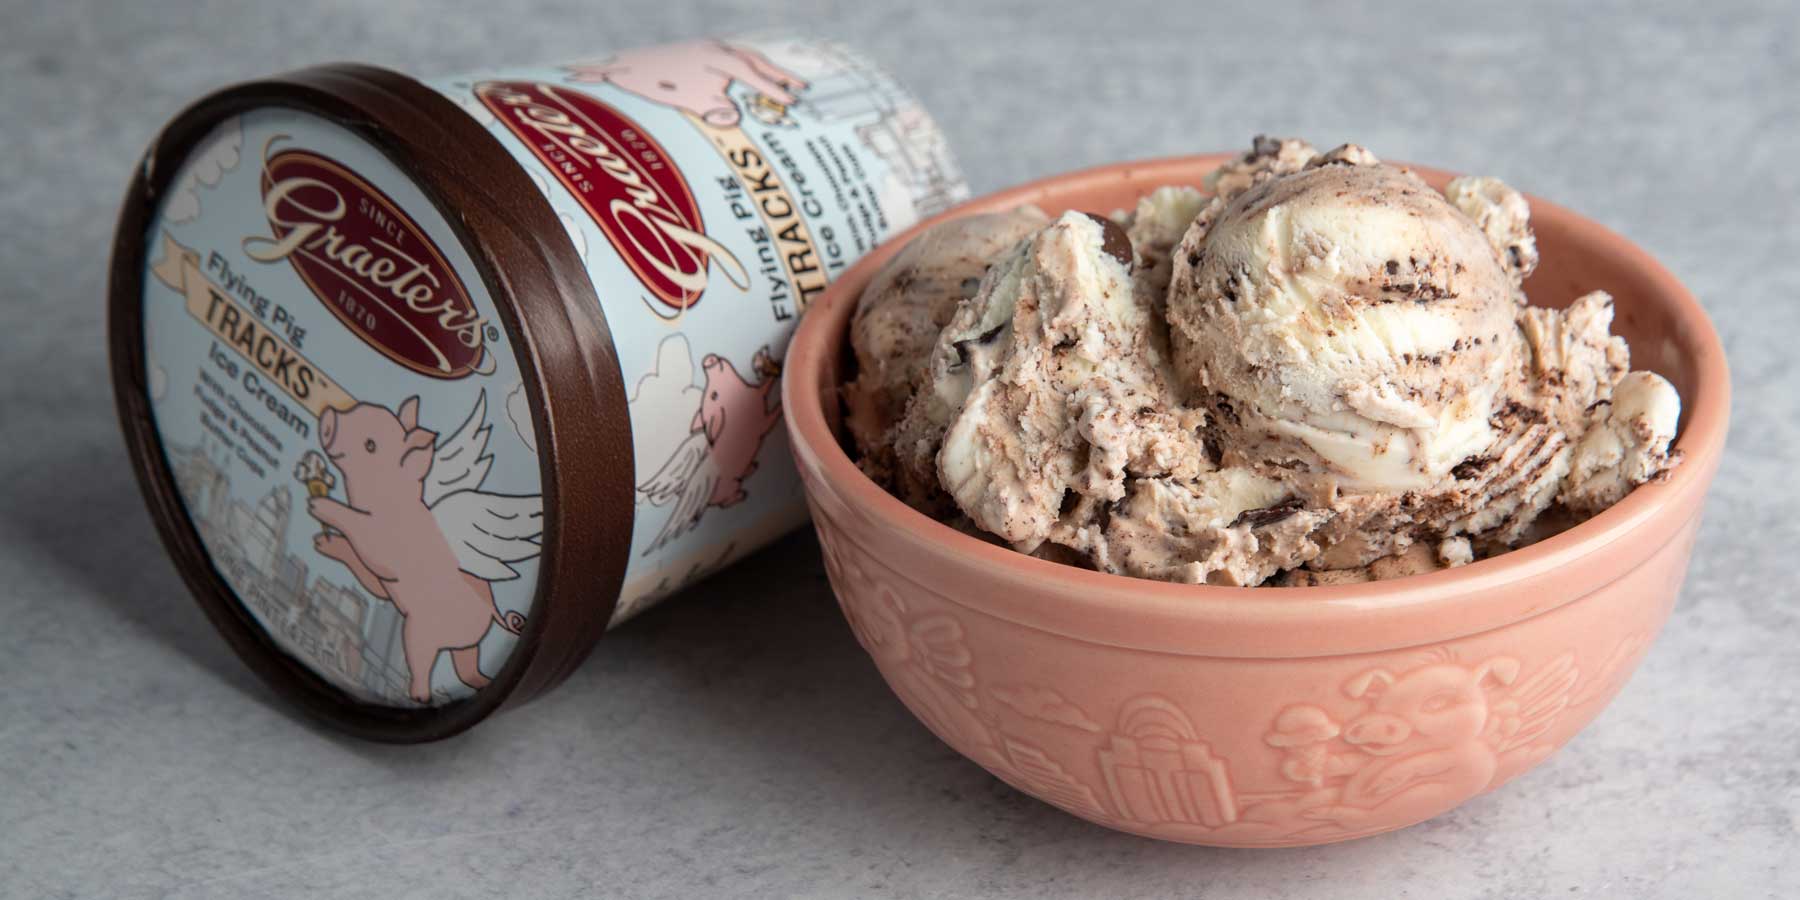 Graeter’s Ice Cream Celebrates Flying Pig Anniversary with Limited Edition Flavor